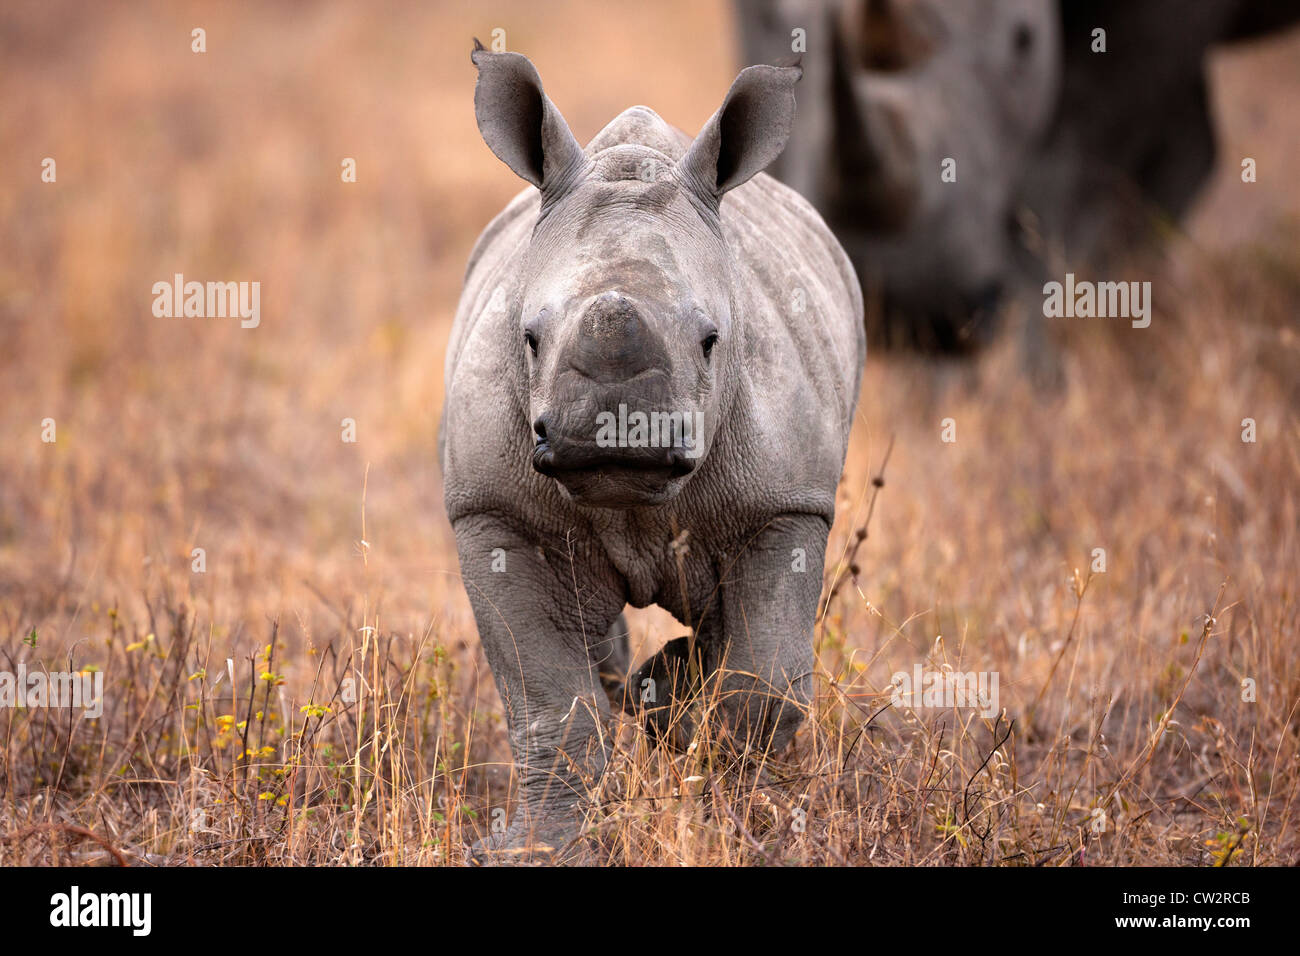 Front view of baby Rhinoceros walking with mother Stock Photo